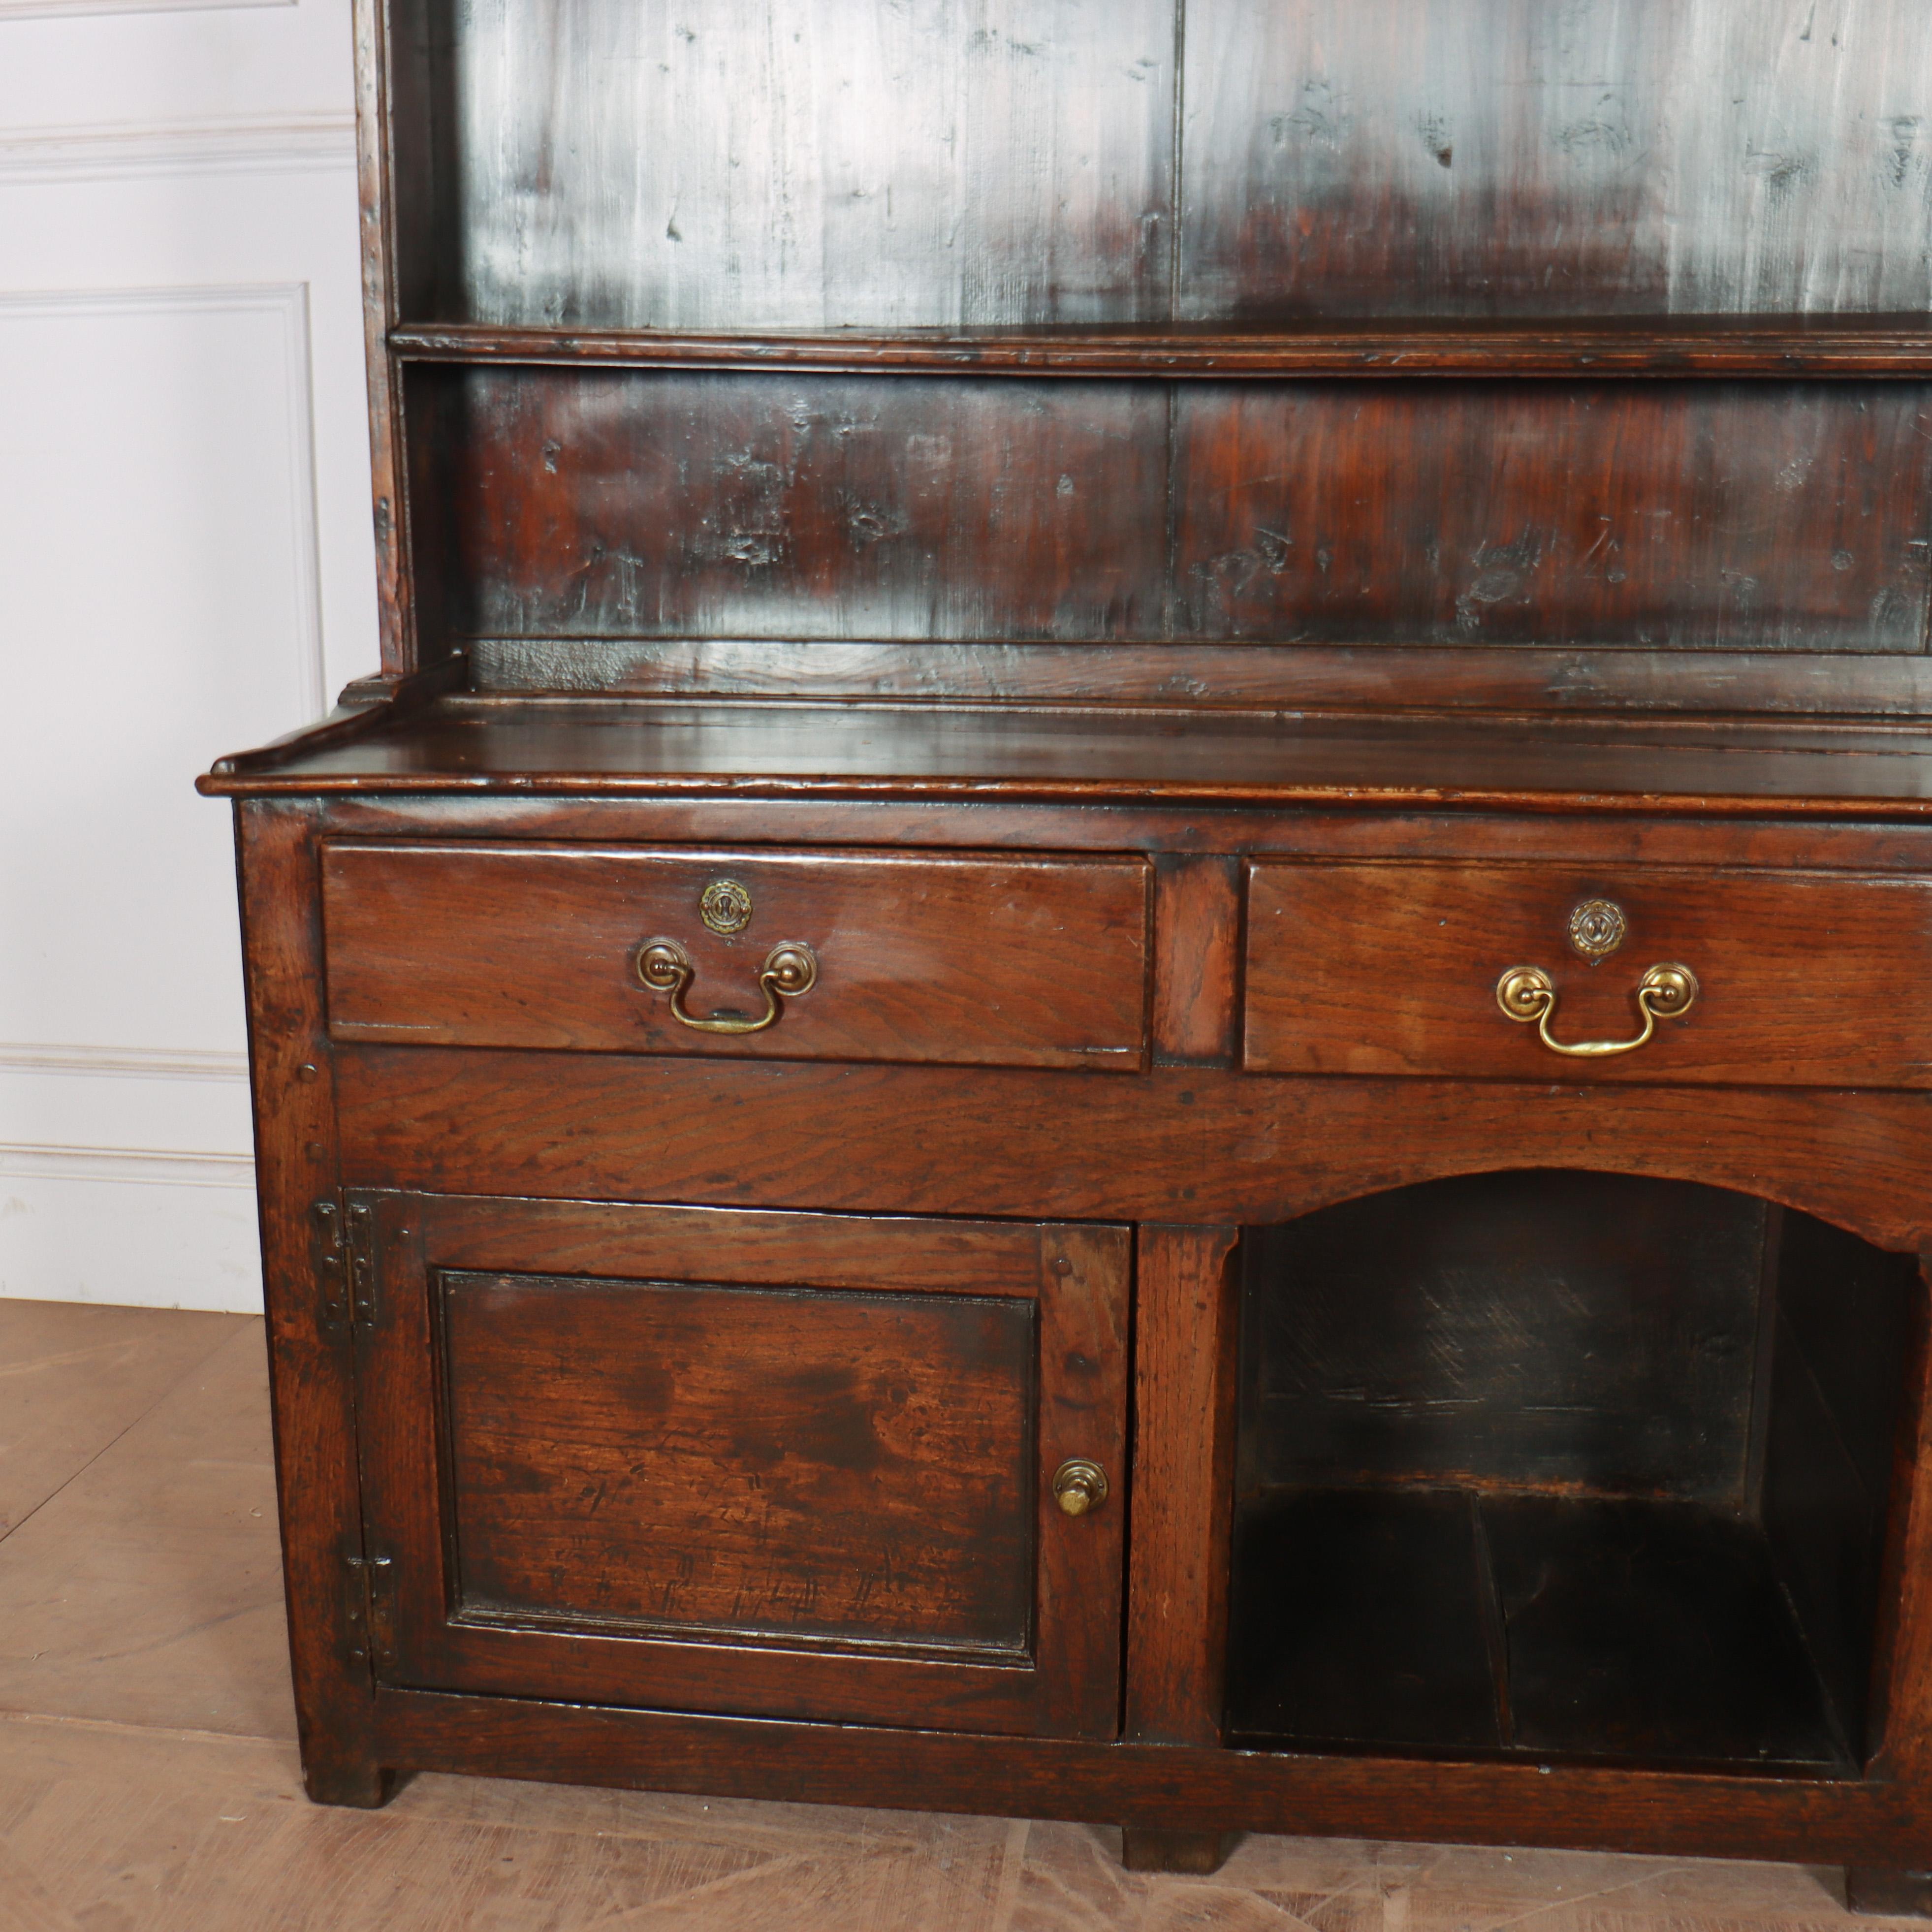 Wonderful little 18th C oak and pine Welsh dresser. 1780.

Reference: 8266

Dimensions
69.5 inches (177 cms) Wide
18 inches (46 cms) Deep
73 inches (185 cms) High